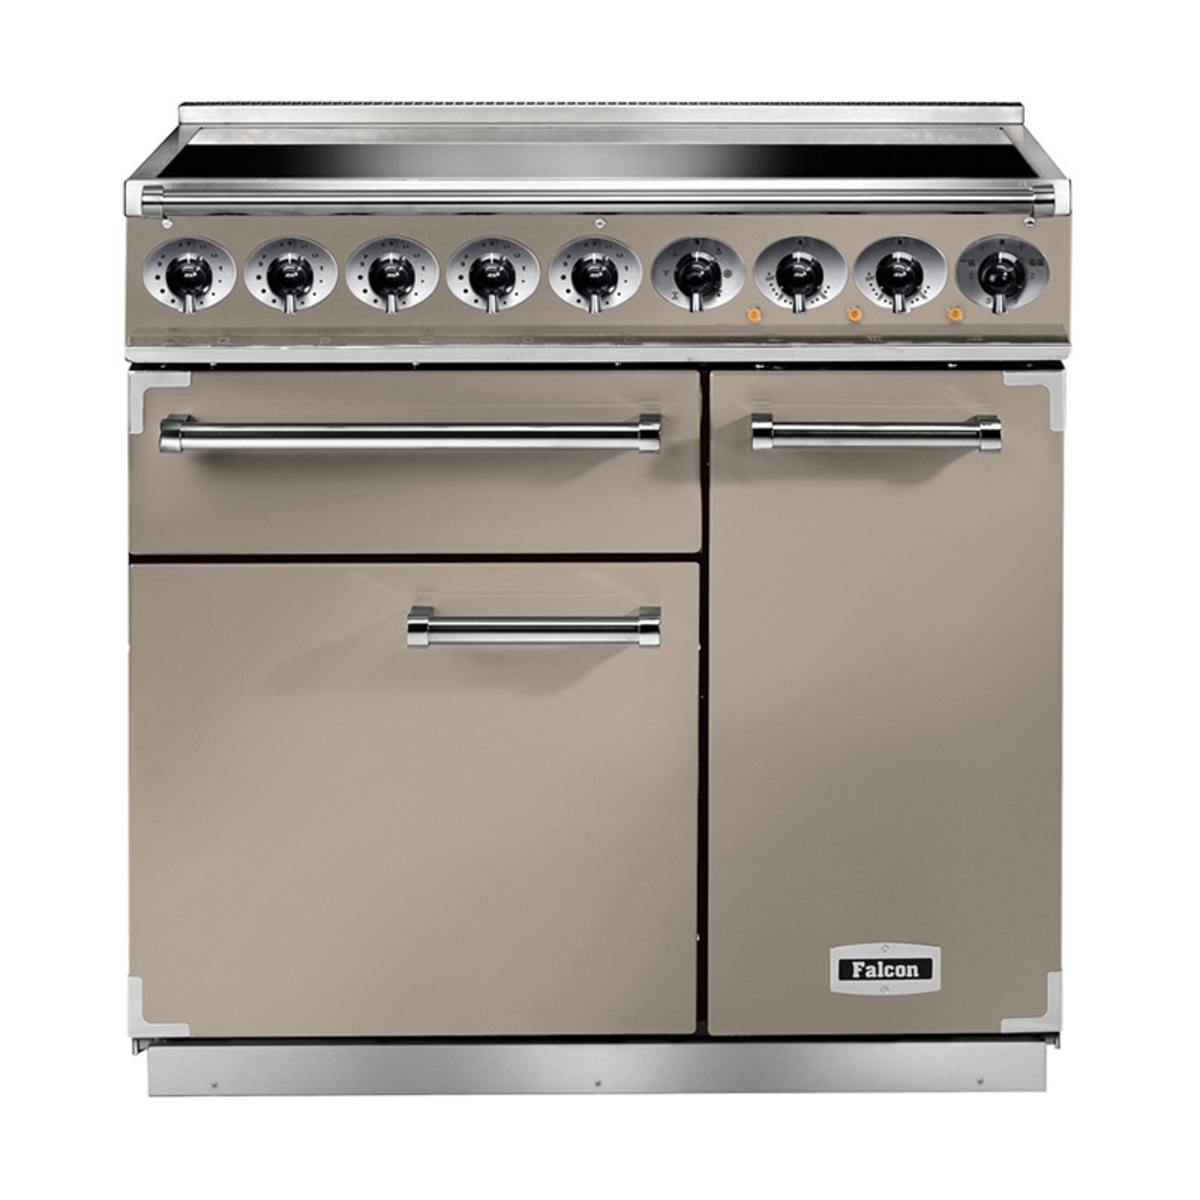 FALCON 115320 (F900DXEIFN/N) 90cm Deluxe Induction Range Cooker, Fawn/N